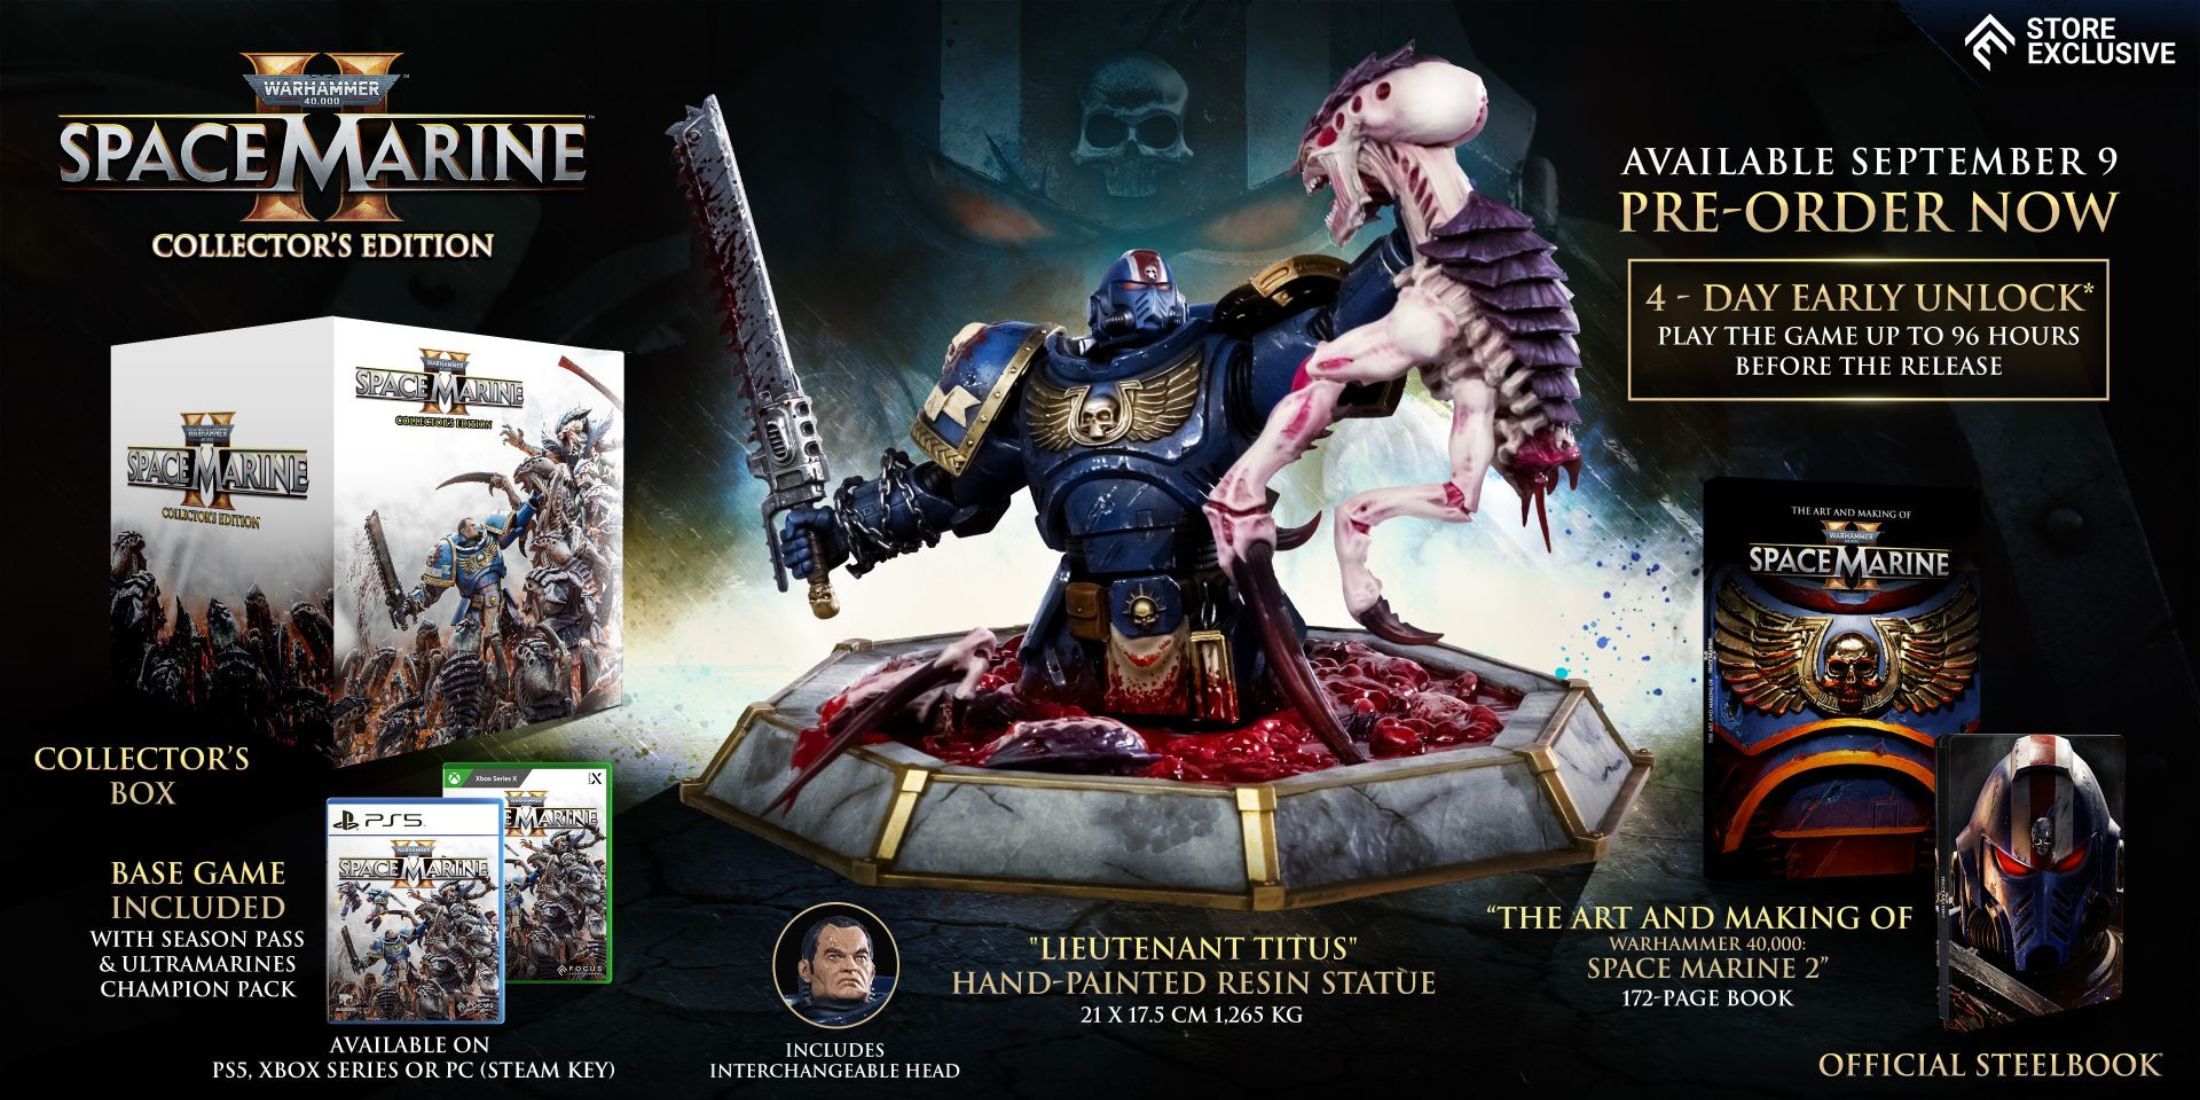 The details of the Collector's Edition of Warhammer 40K: Space Marine 2